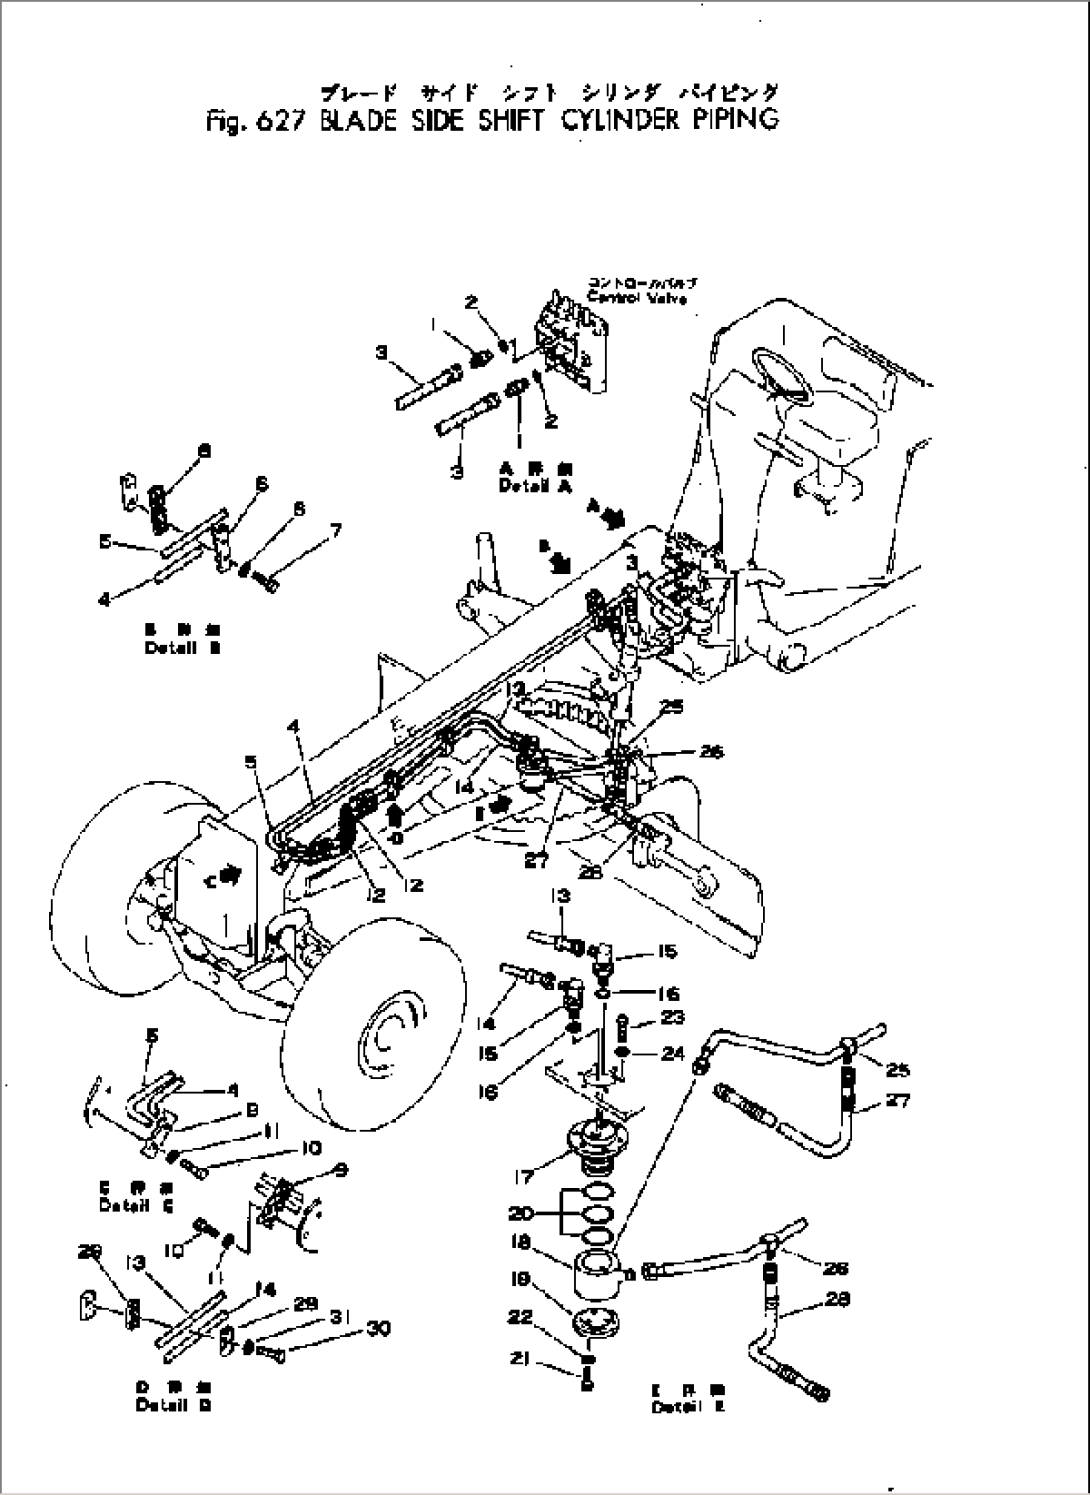 HTDRAULIC PIPING (BLADE SIDE SHIFT CYLINDER LINE)